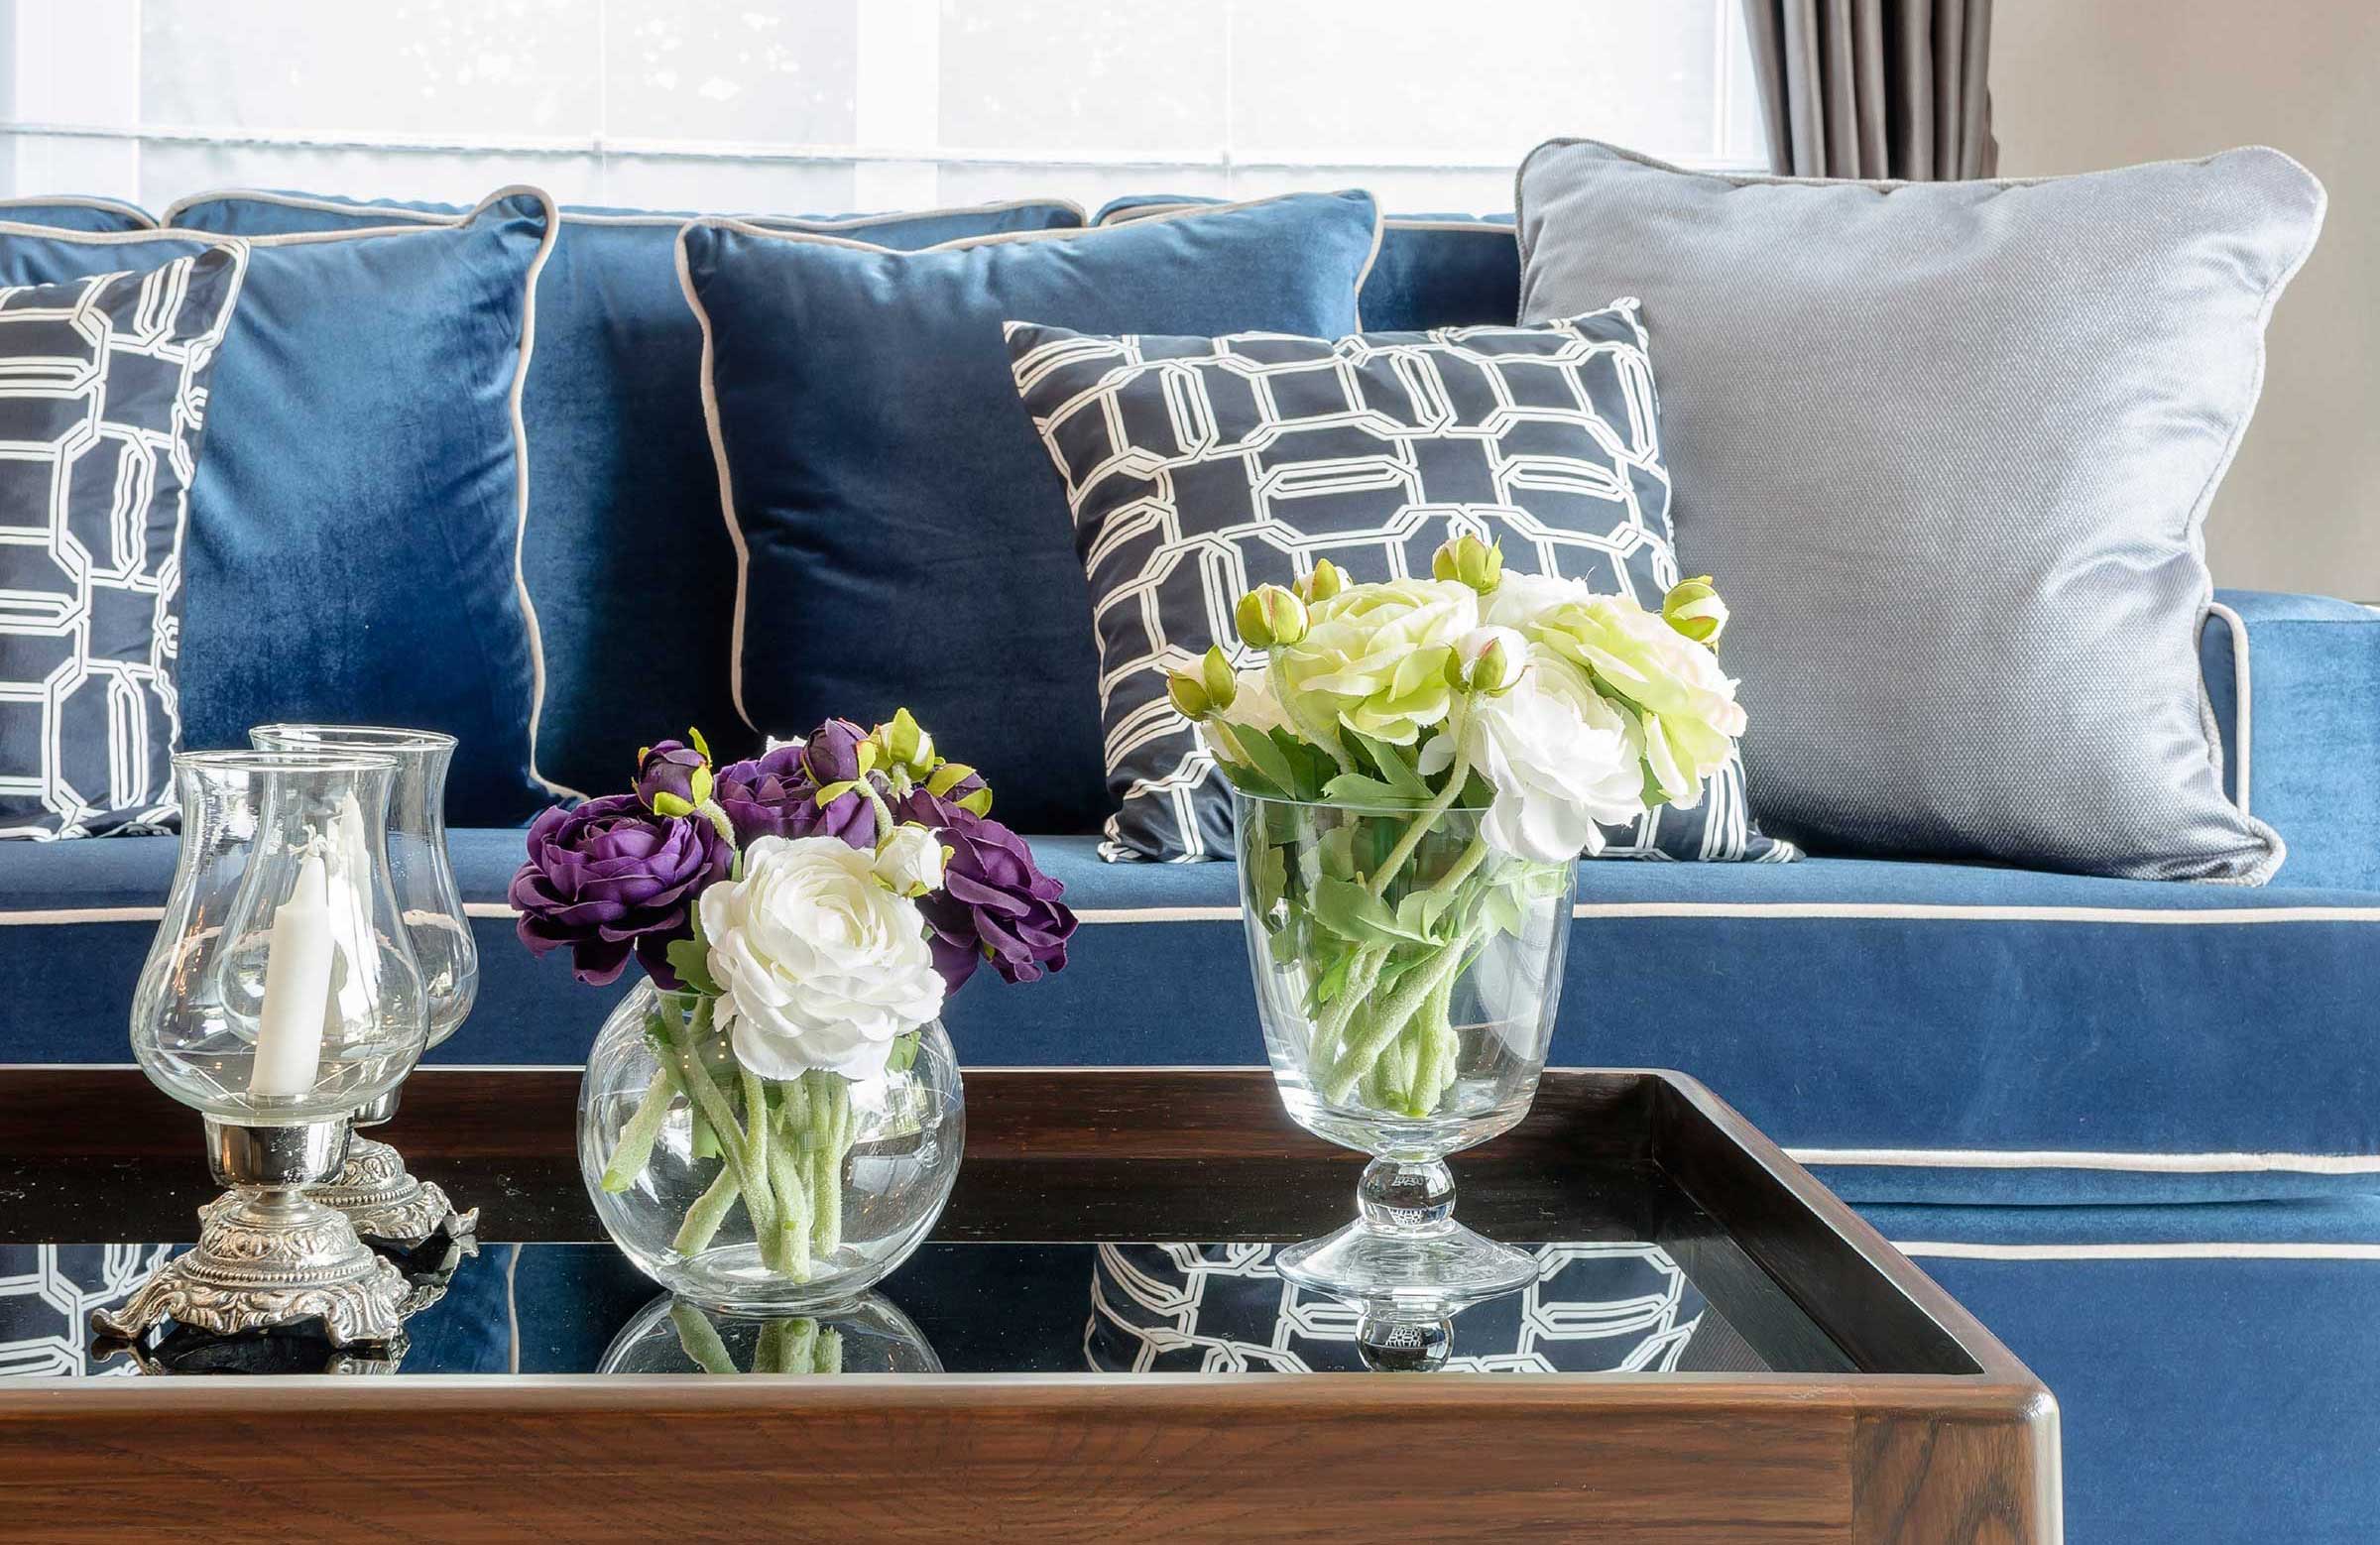 8 decorating mistakes that make your home look messy